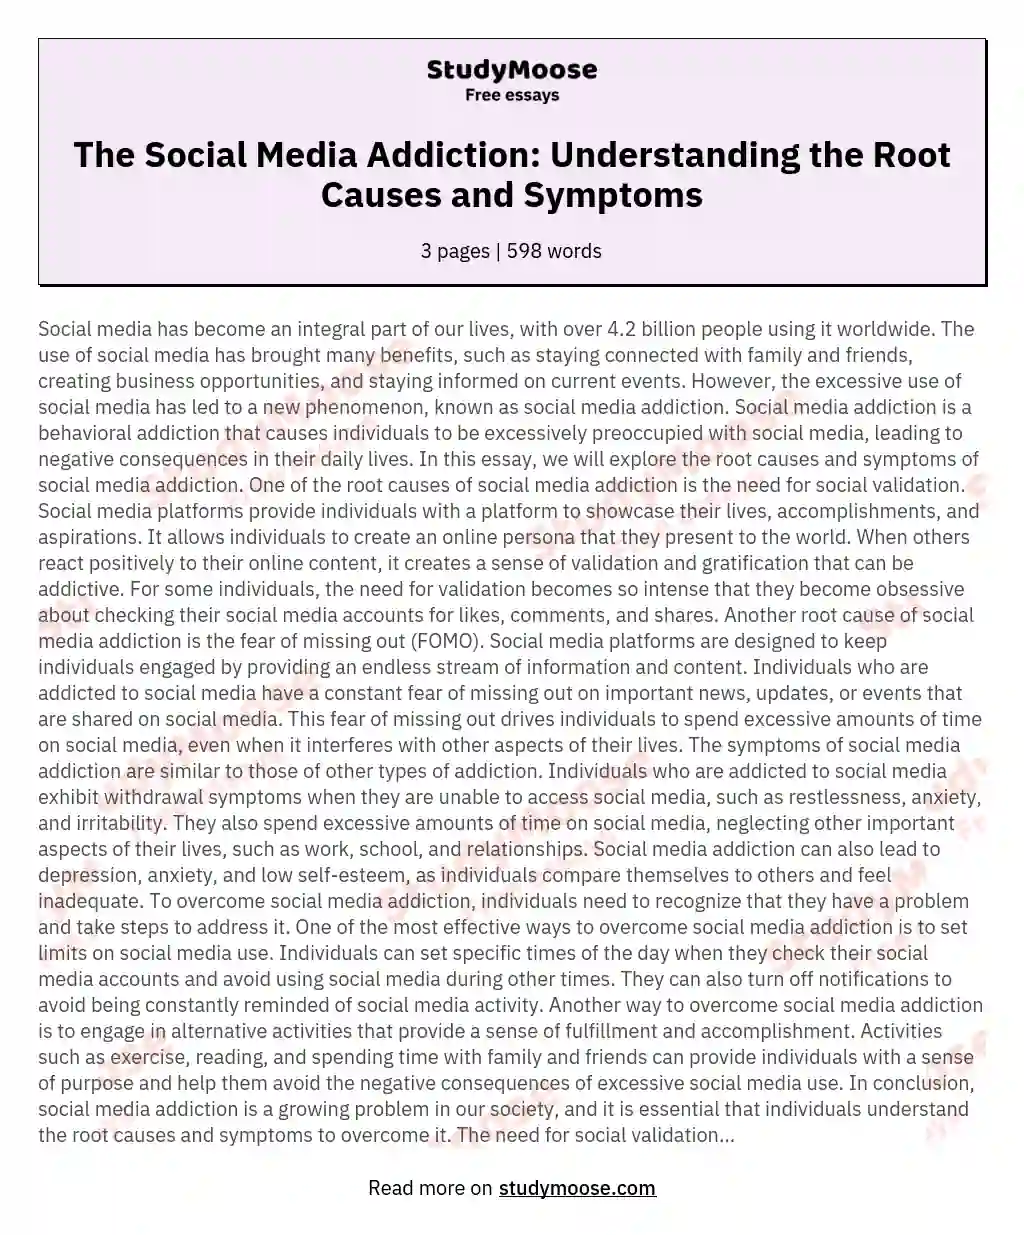 The Social Media Addiction: Understanding the Root Causes and Symptoms essay